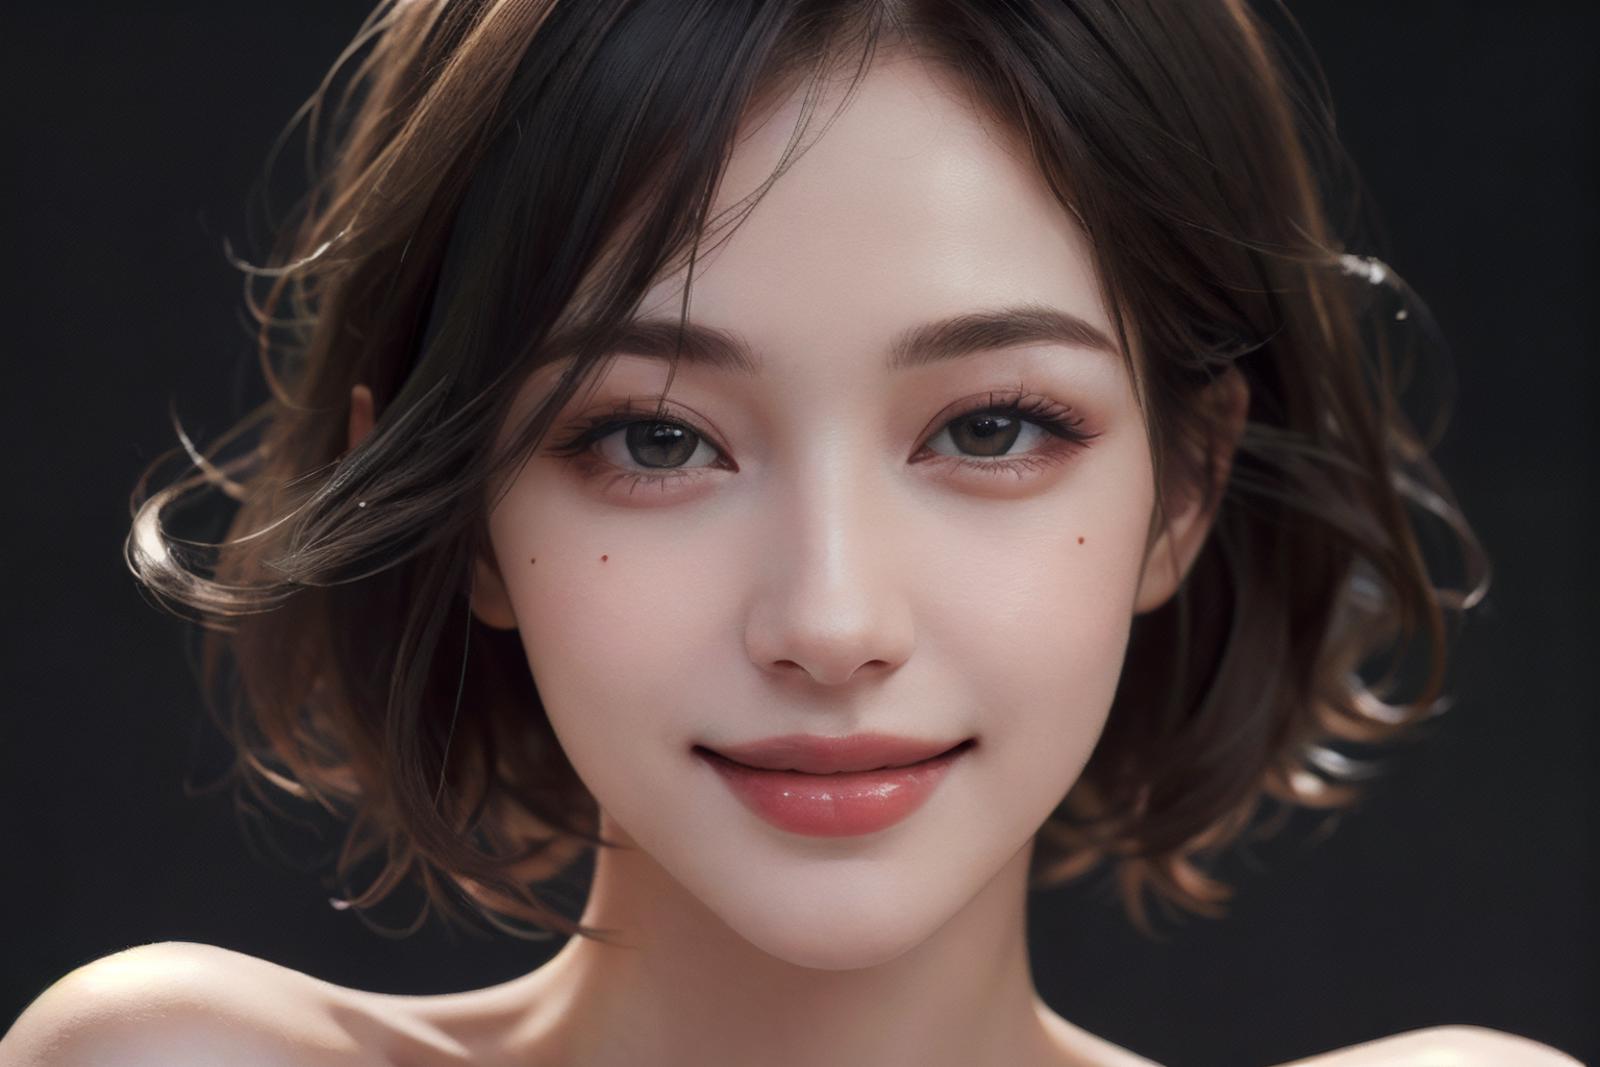 AI model image by Bei3